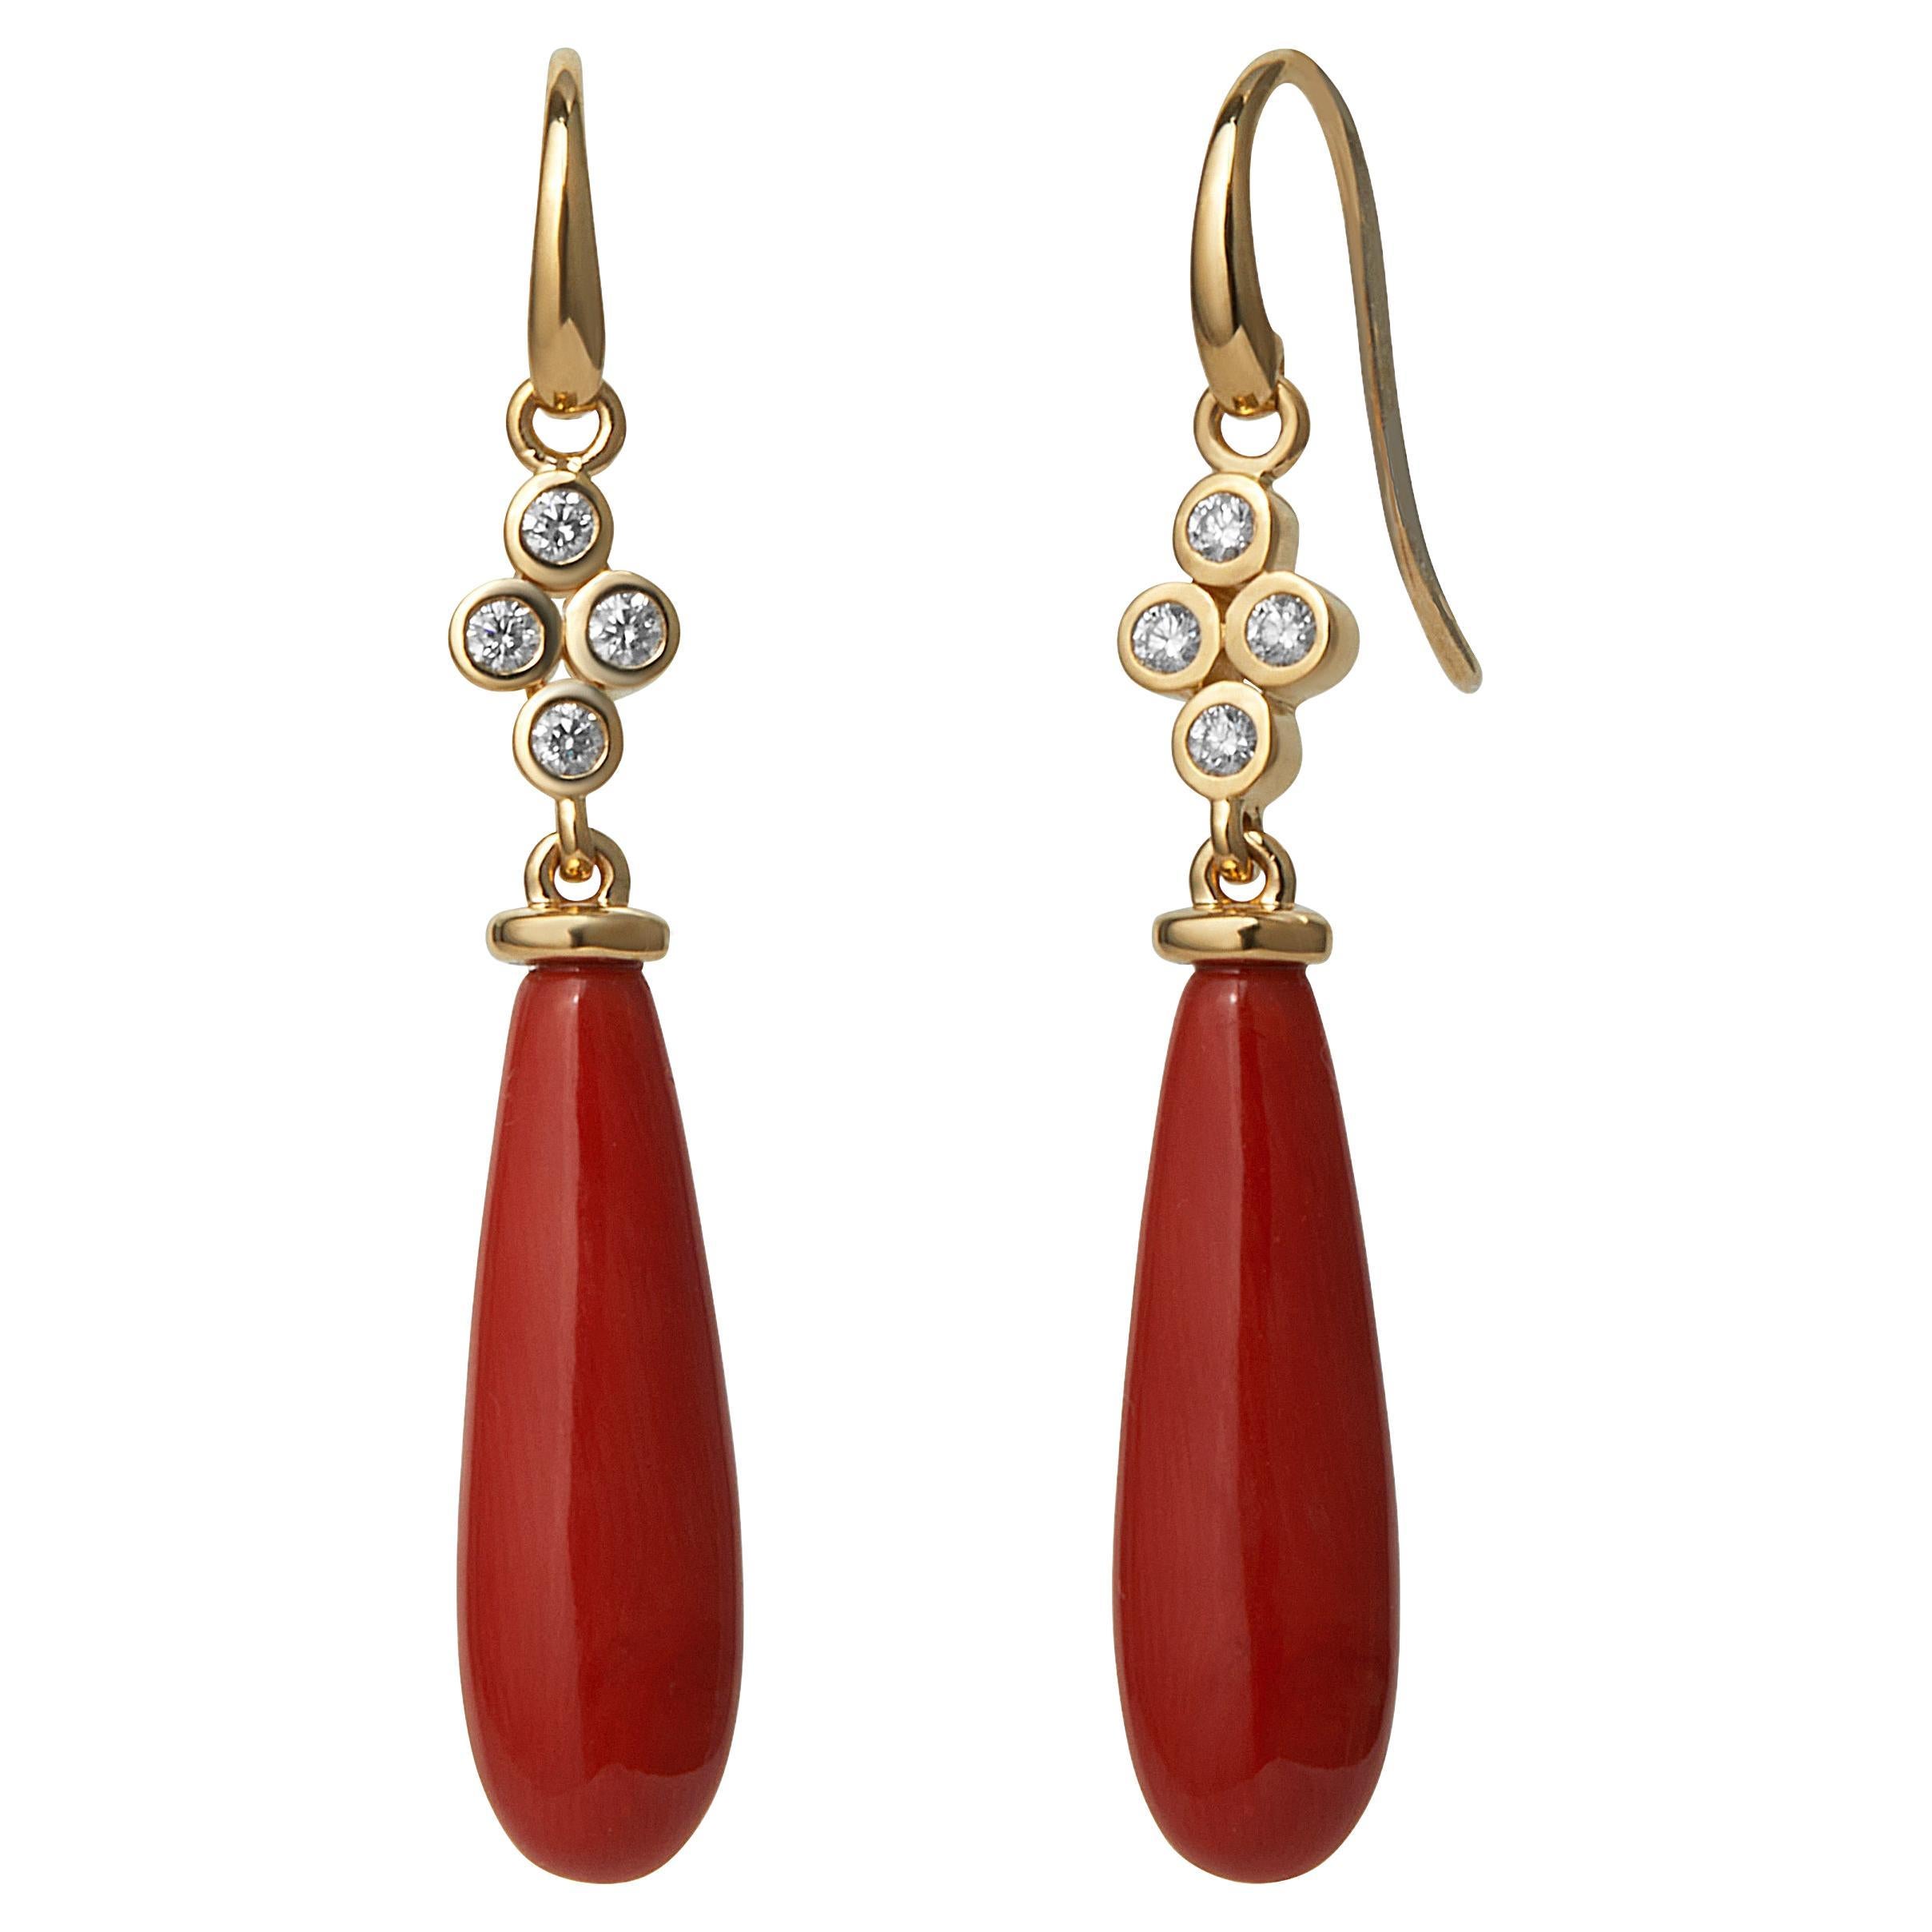 Syna Yellow Gold Coral Long Drop Earrings with Diamonds